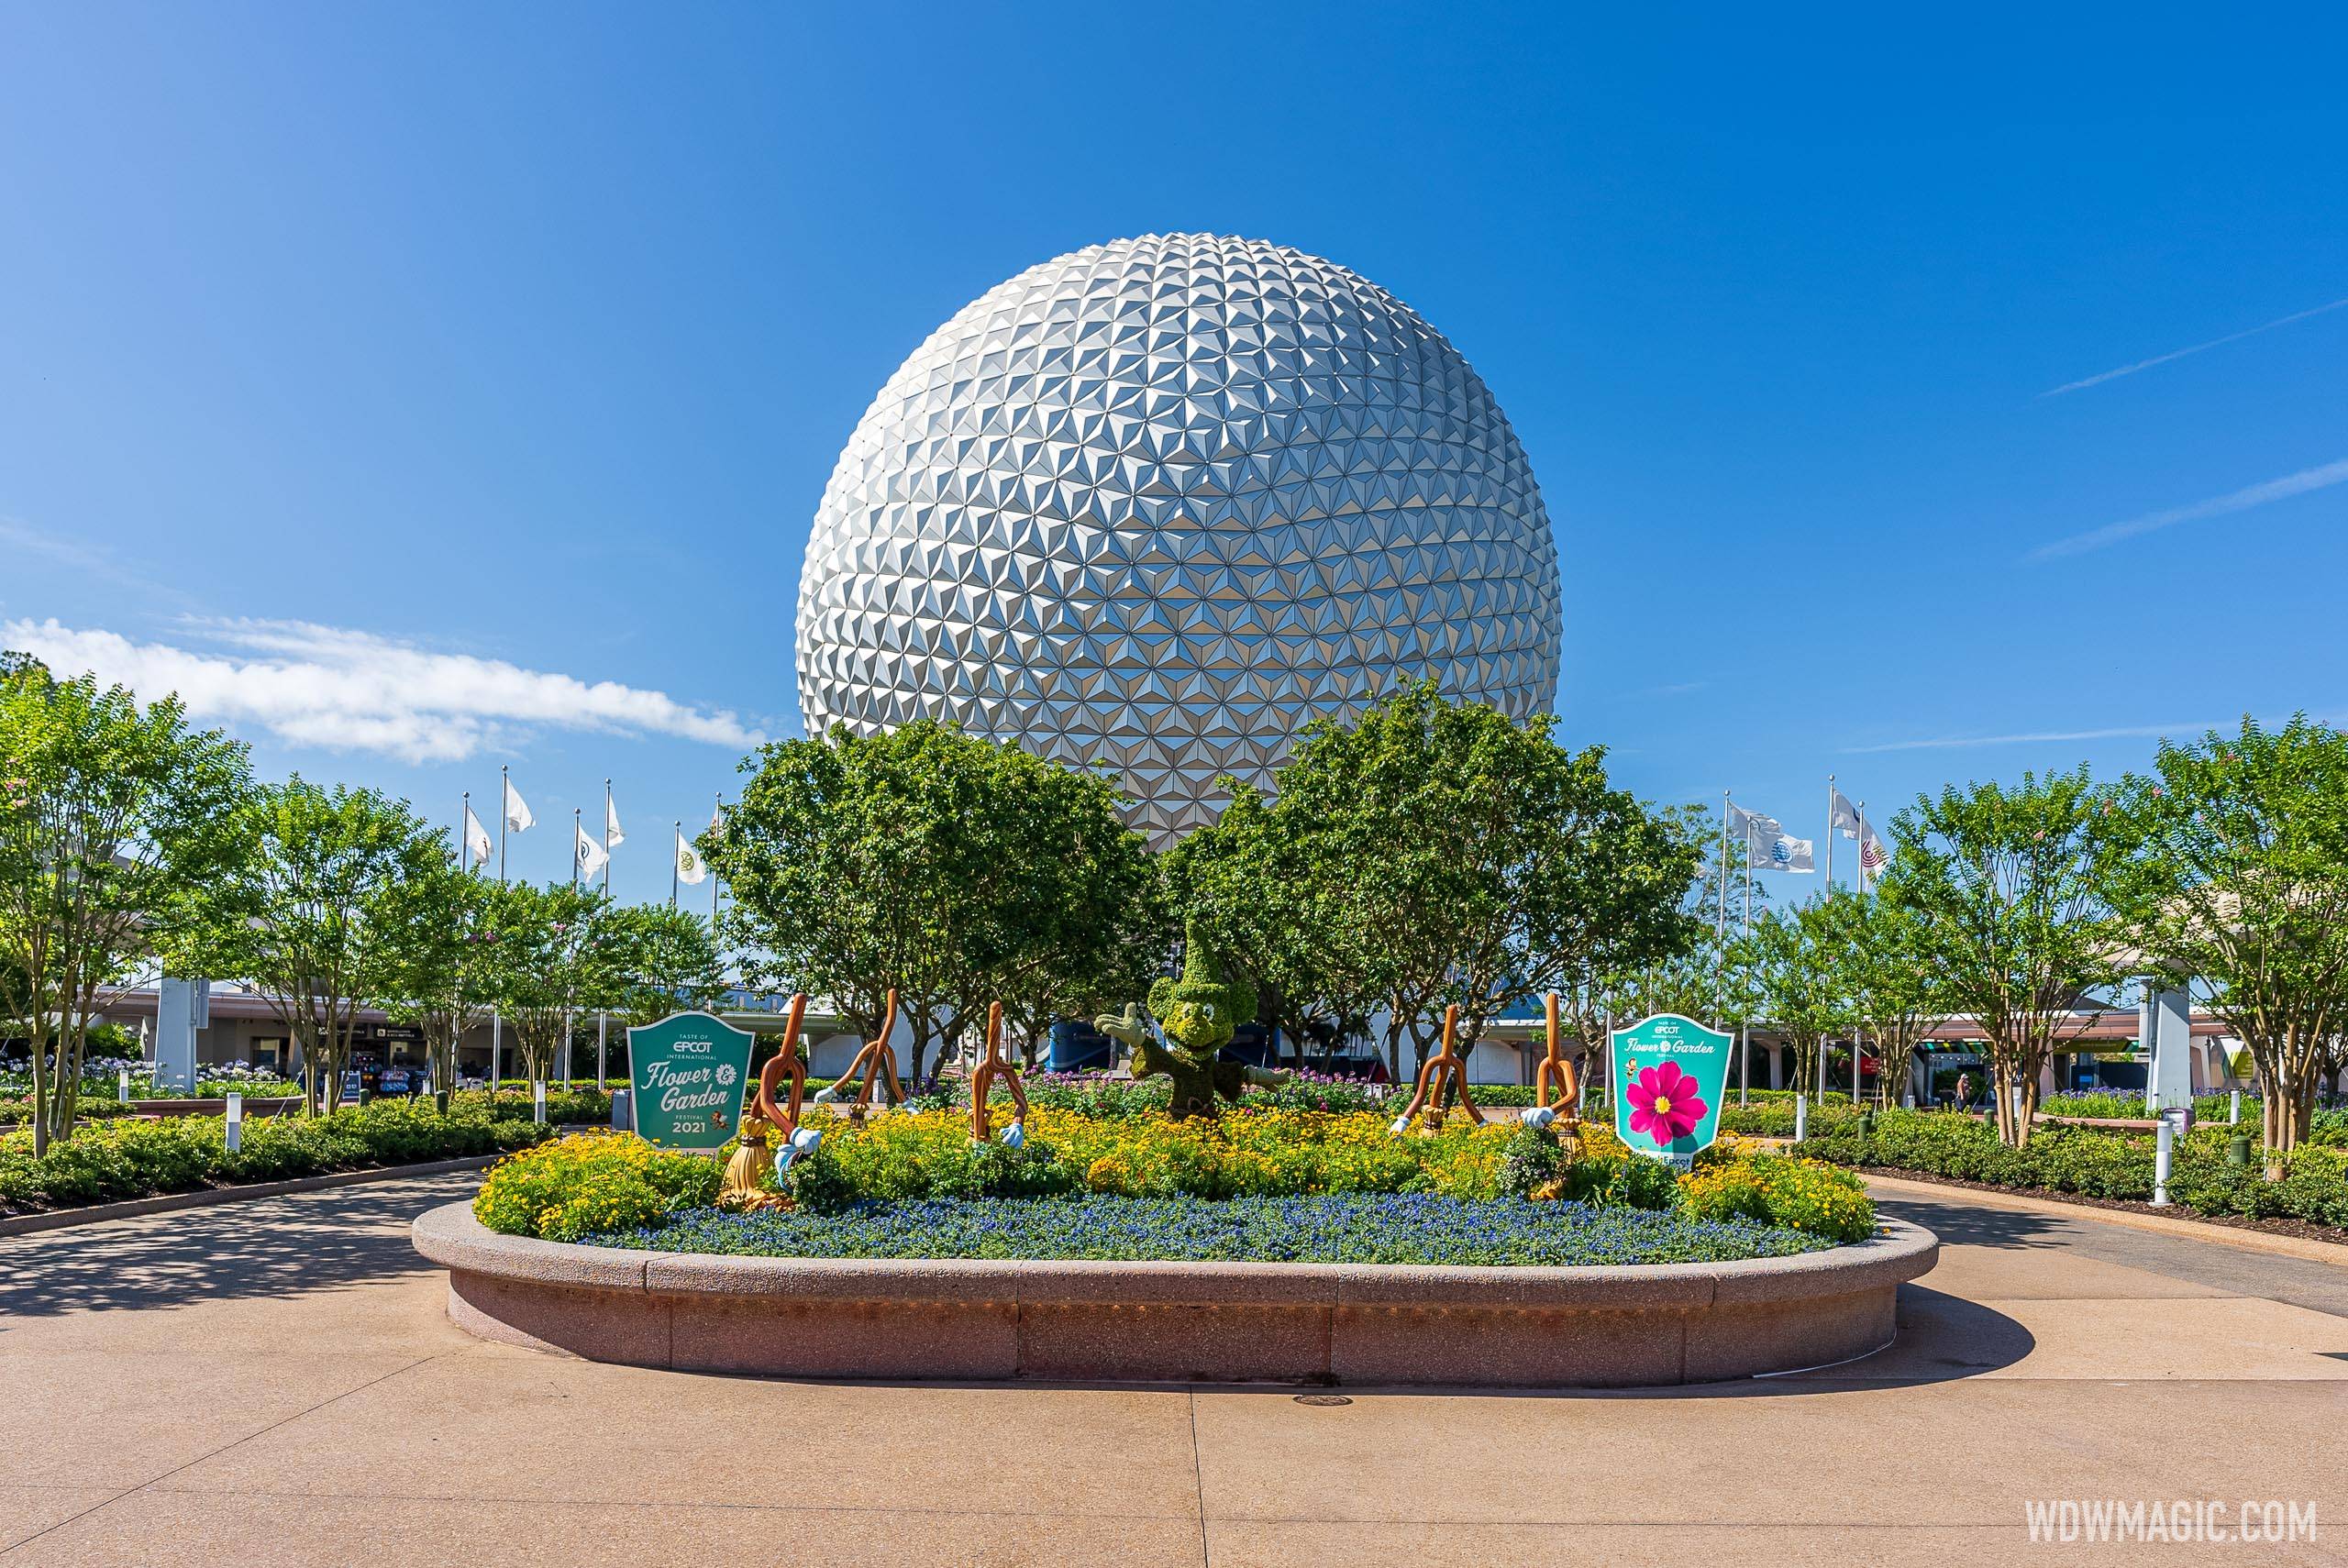 NASA Space Day to be broadcast on the official Disney World website